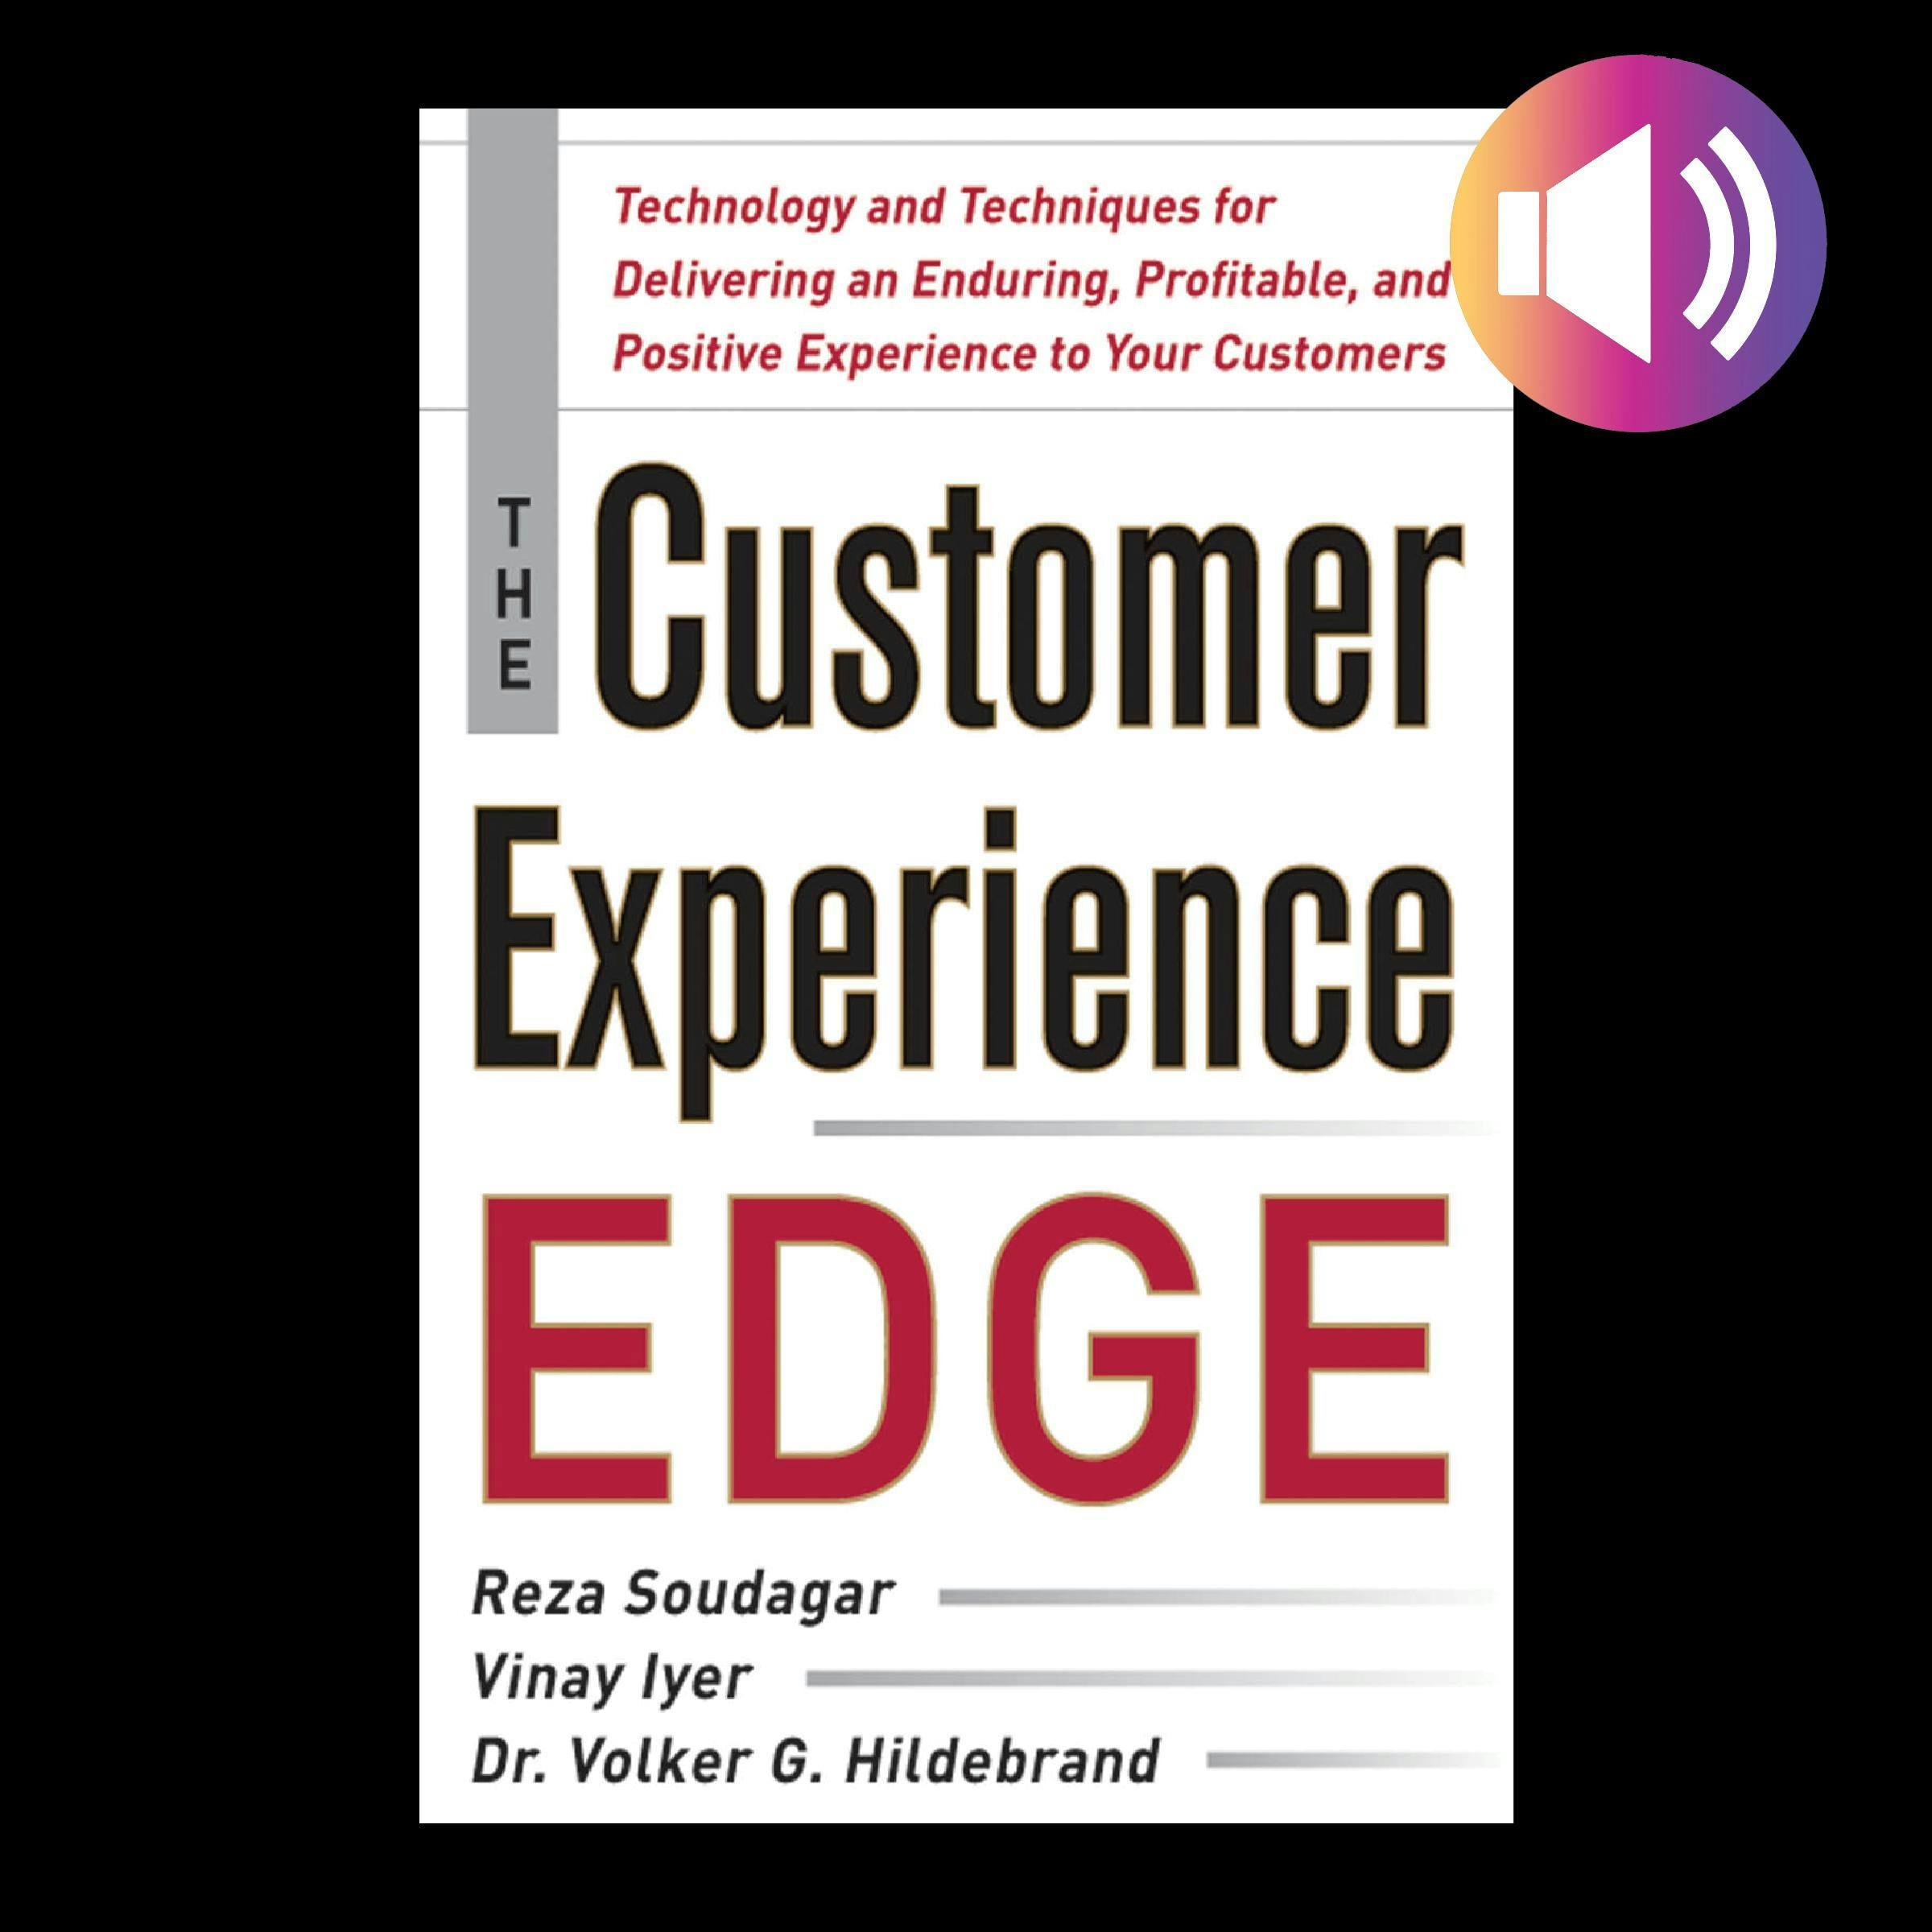 The Customer Experience Edge: Technology and Techniques for Delivering an Enduring, Profitable and Positive Experience to Your Customers - undefined